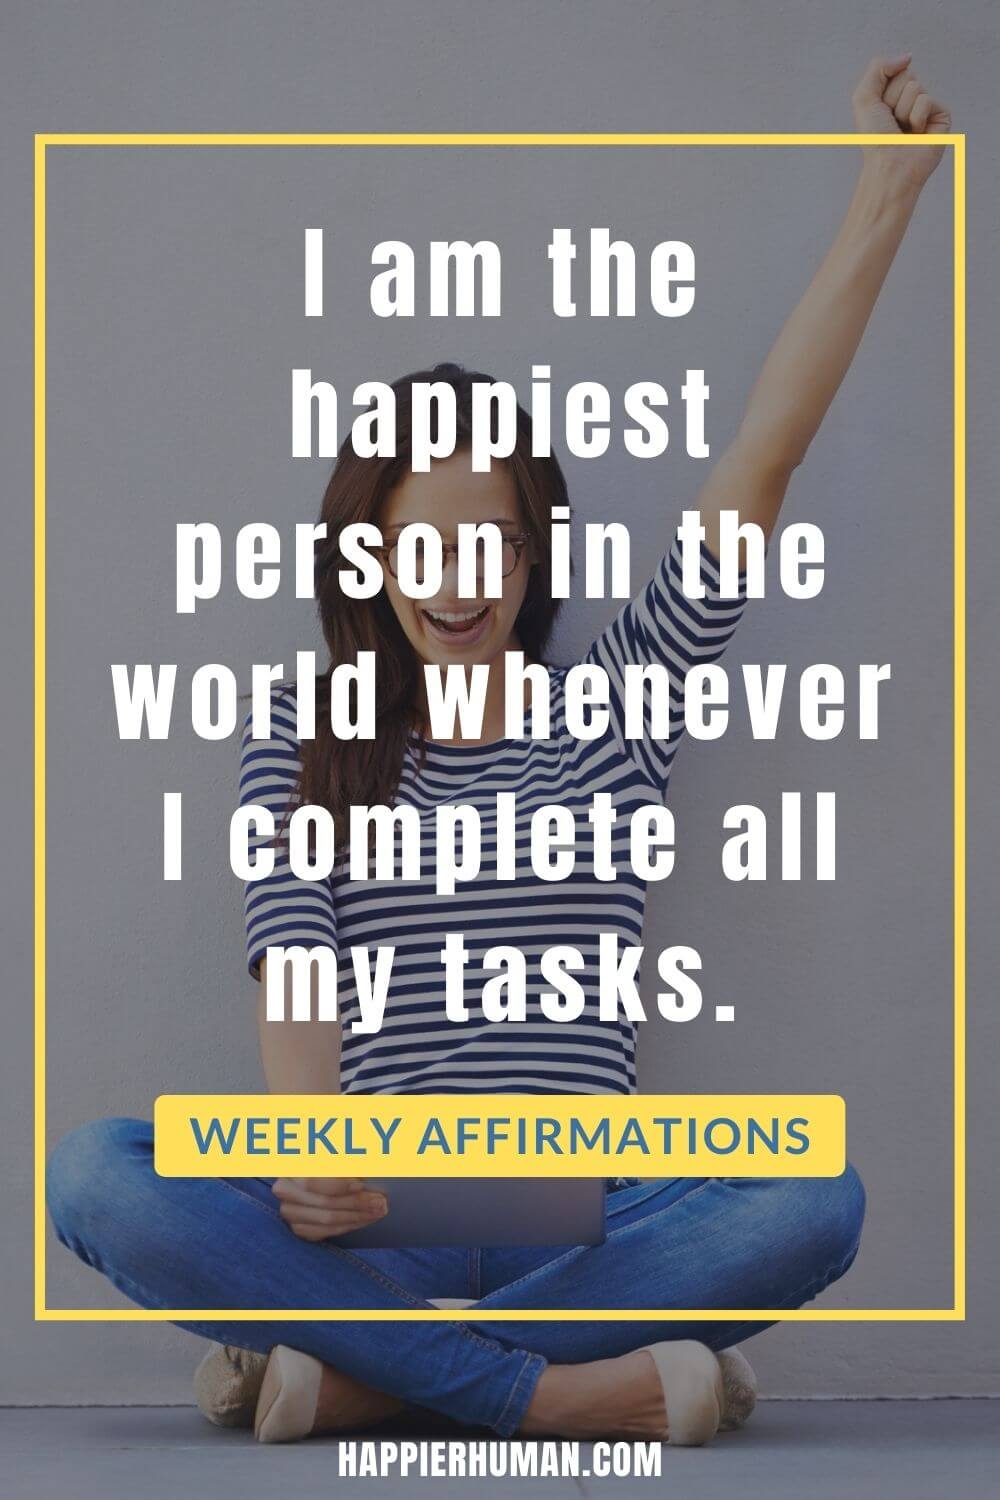 Weekly Affirmations - I am the happiest person in the world whenever I complete all my tasks. | free daily affirmations | affirmation meaning | 365 daily affirmations